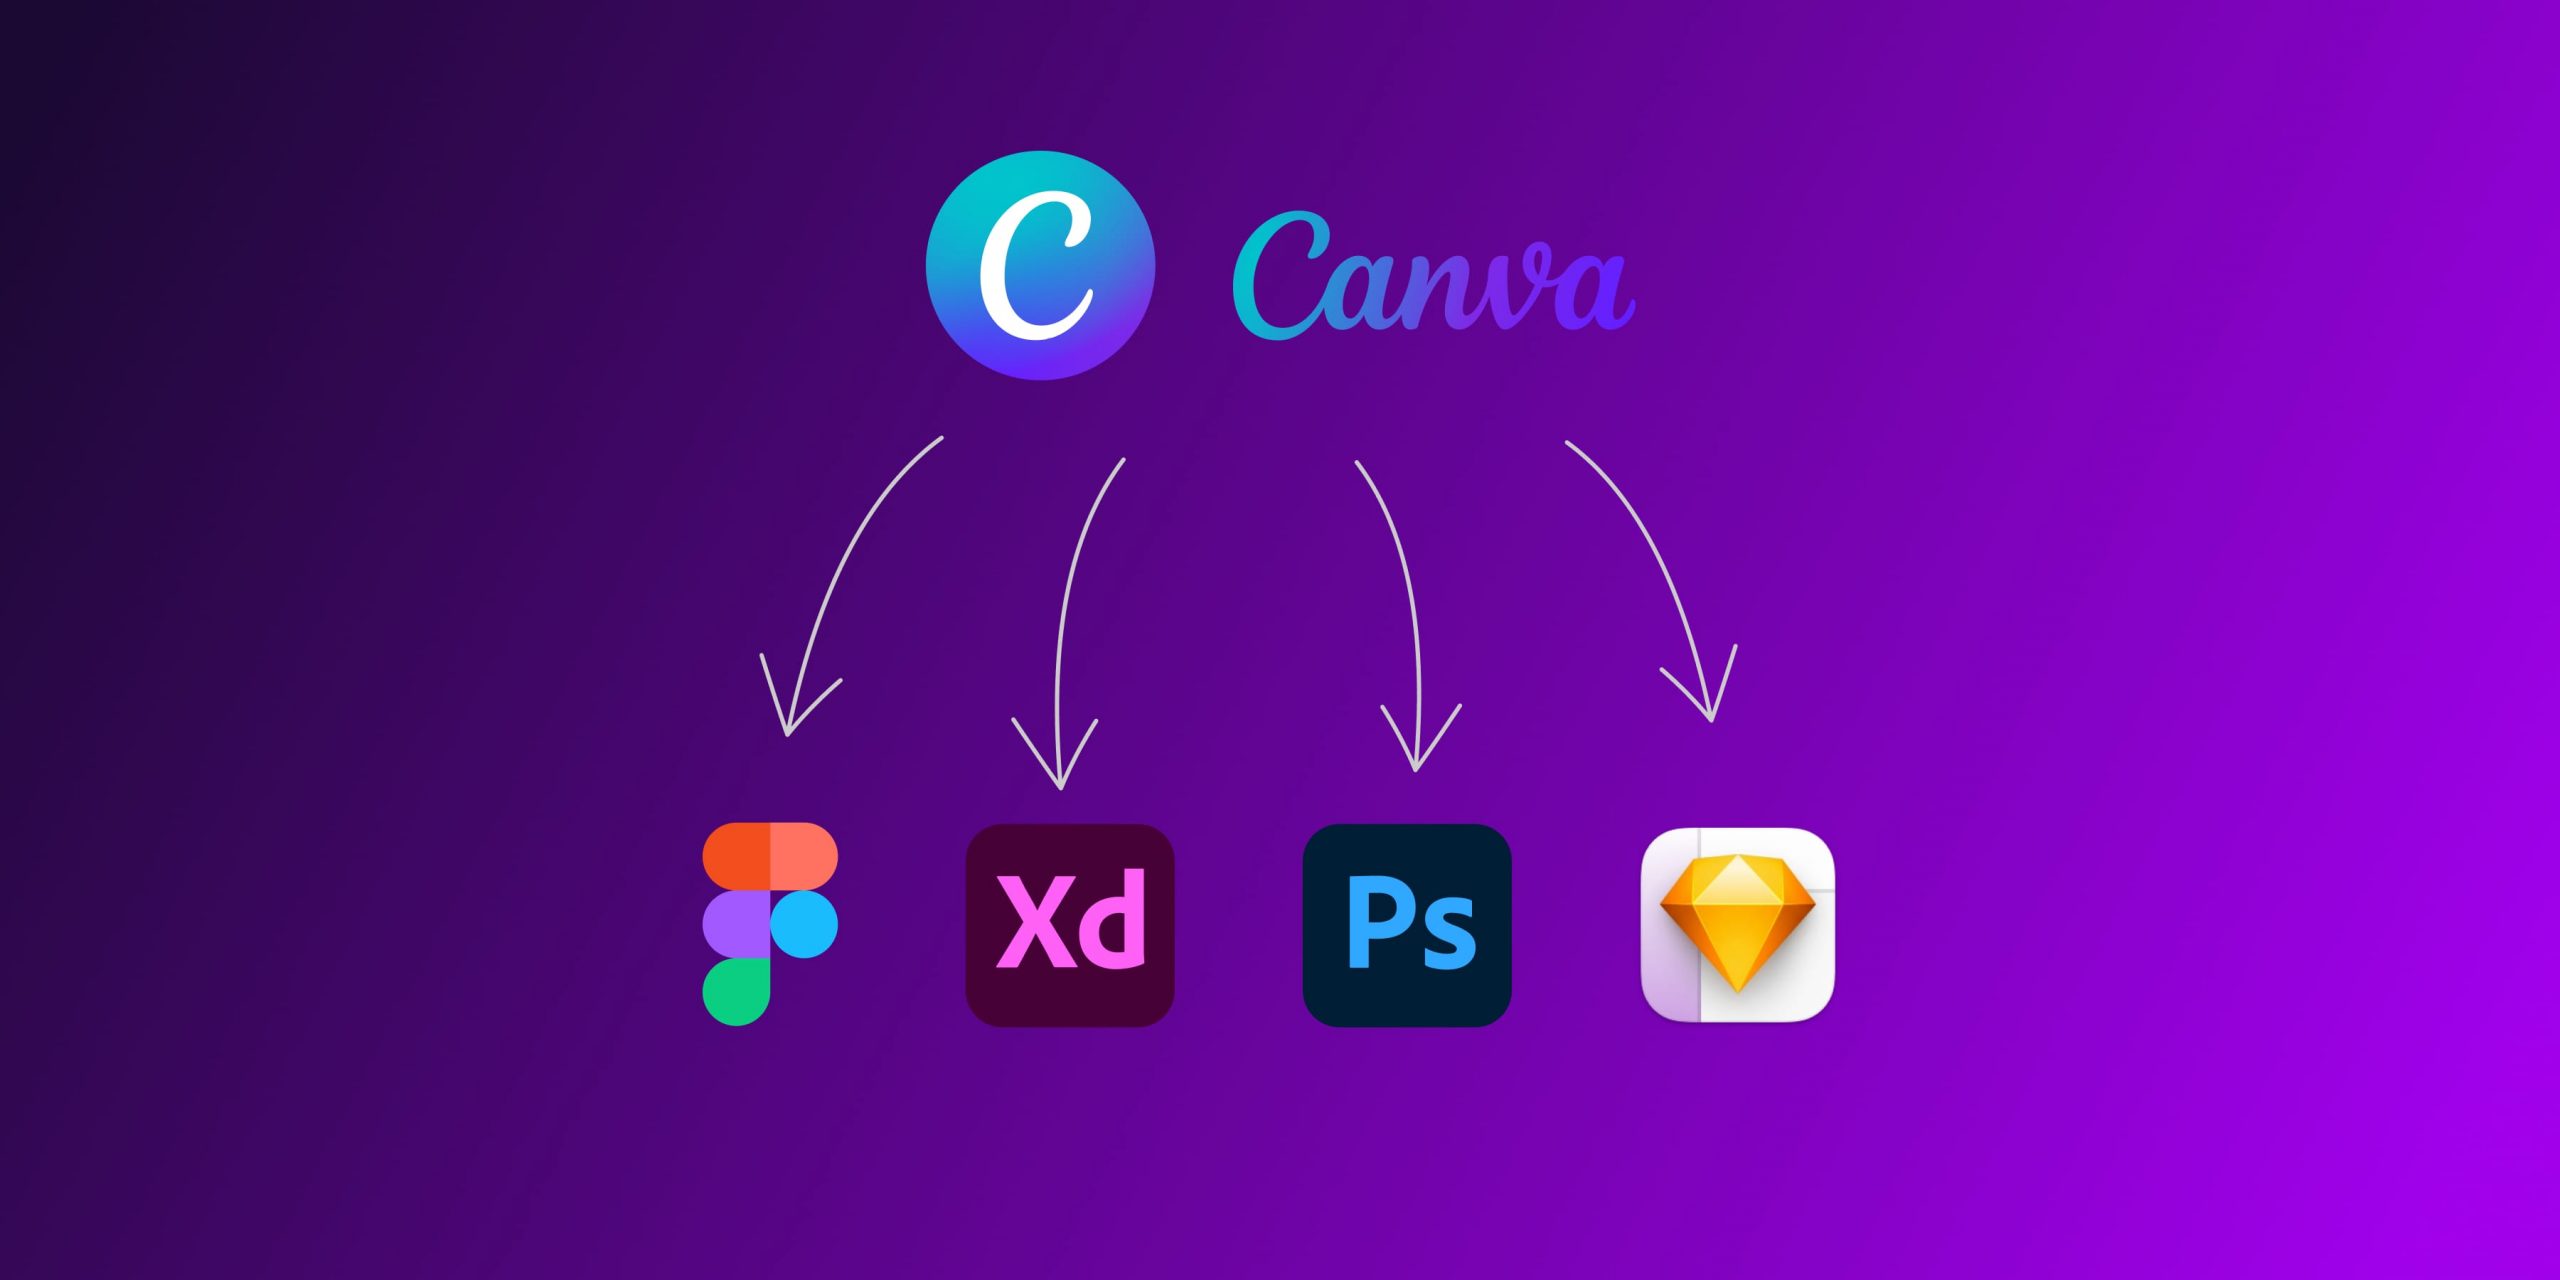 Announcing Our New Canva Converter